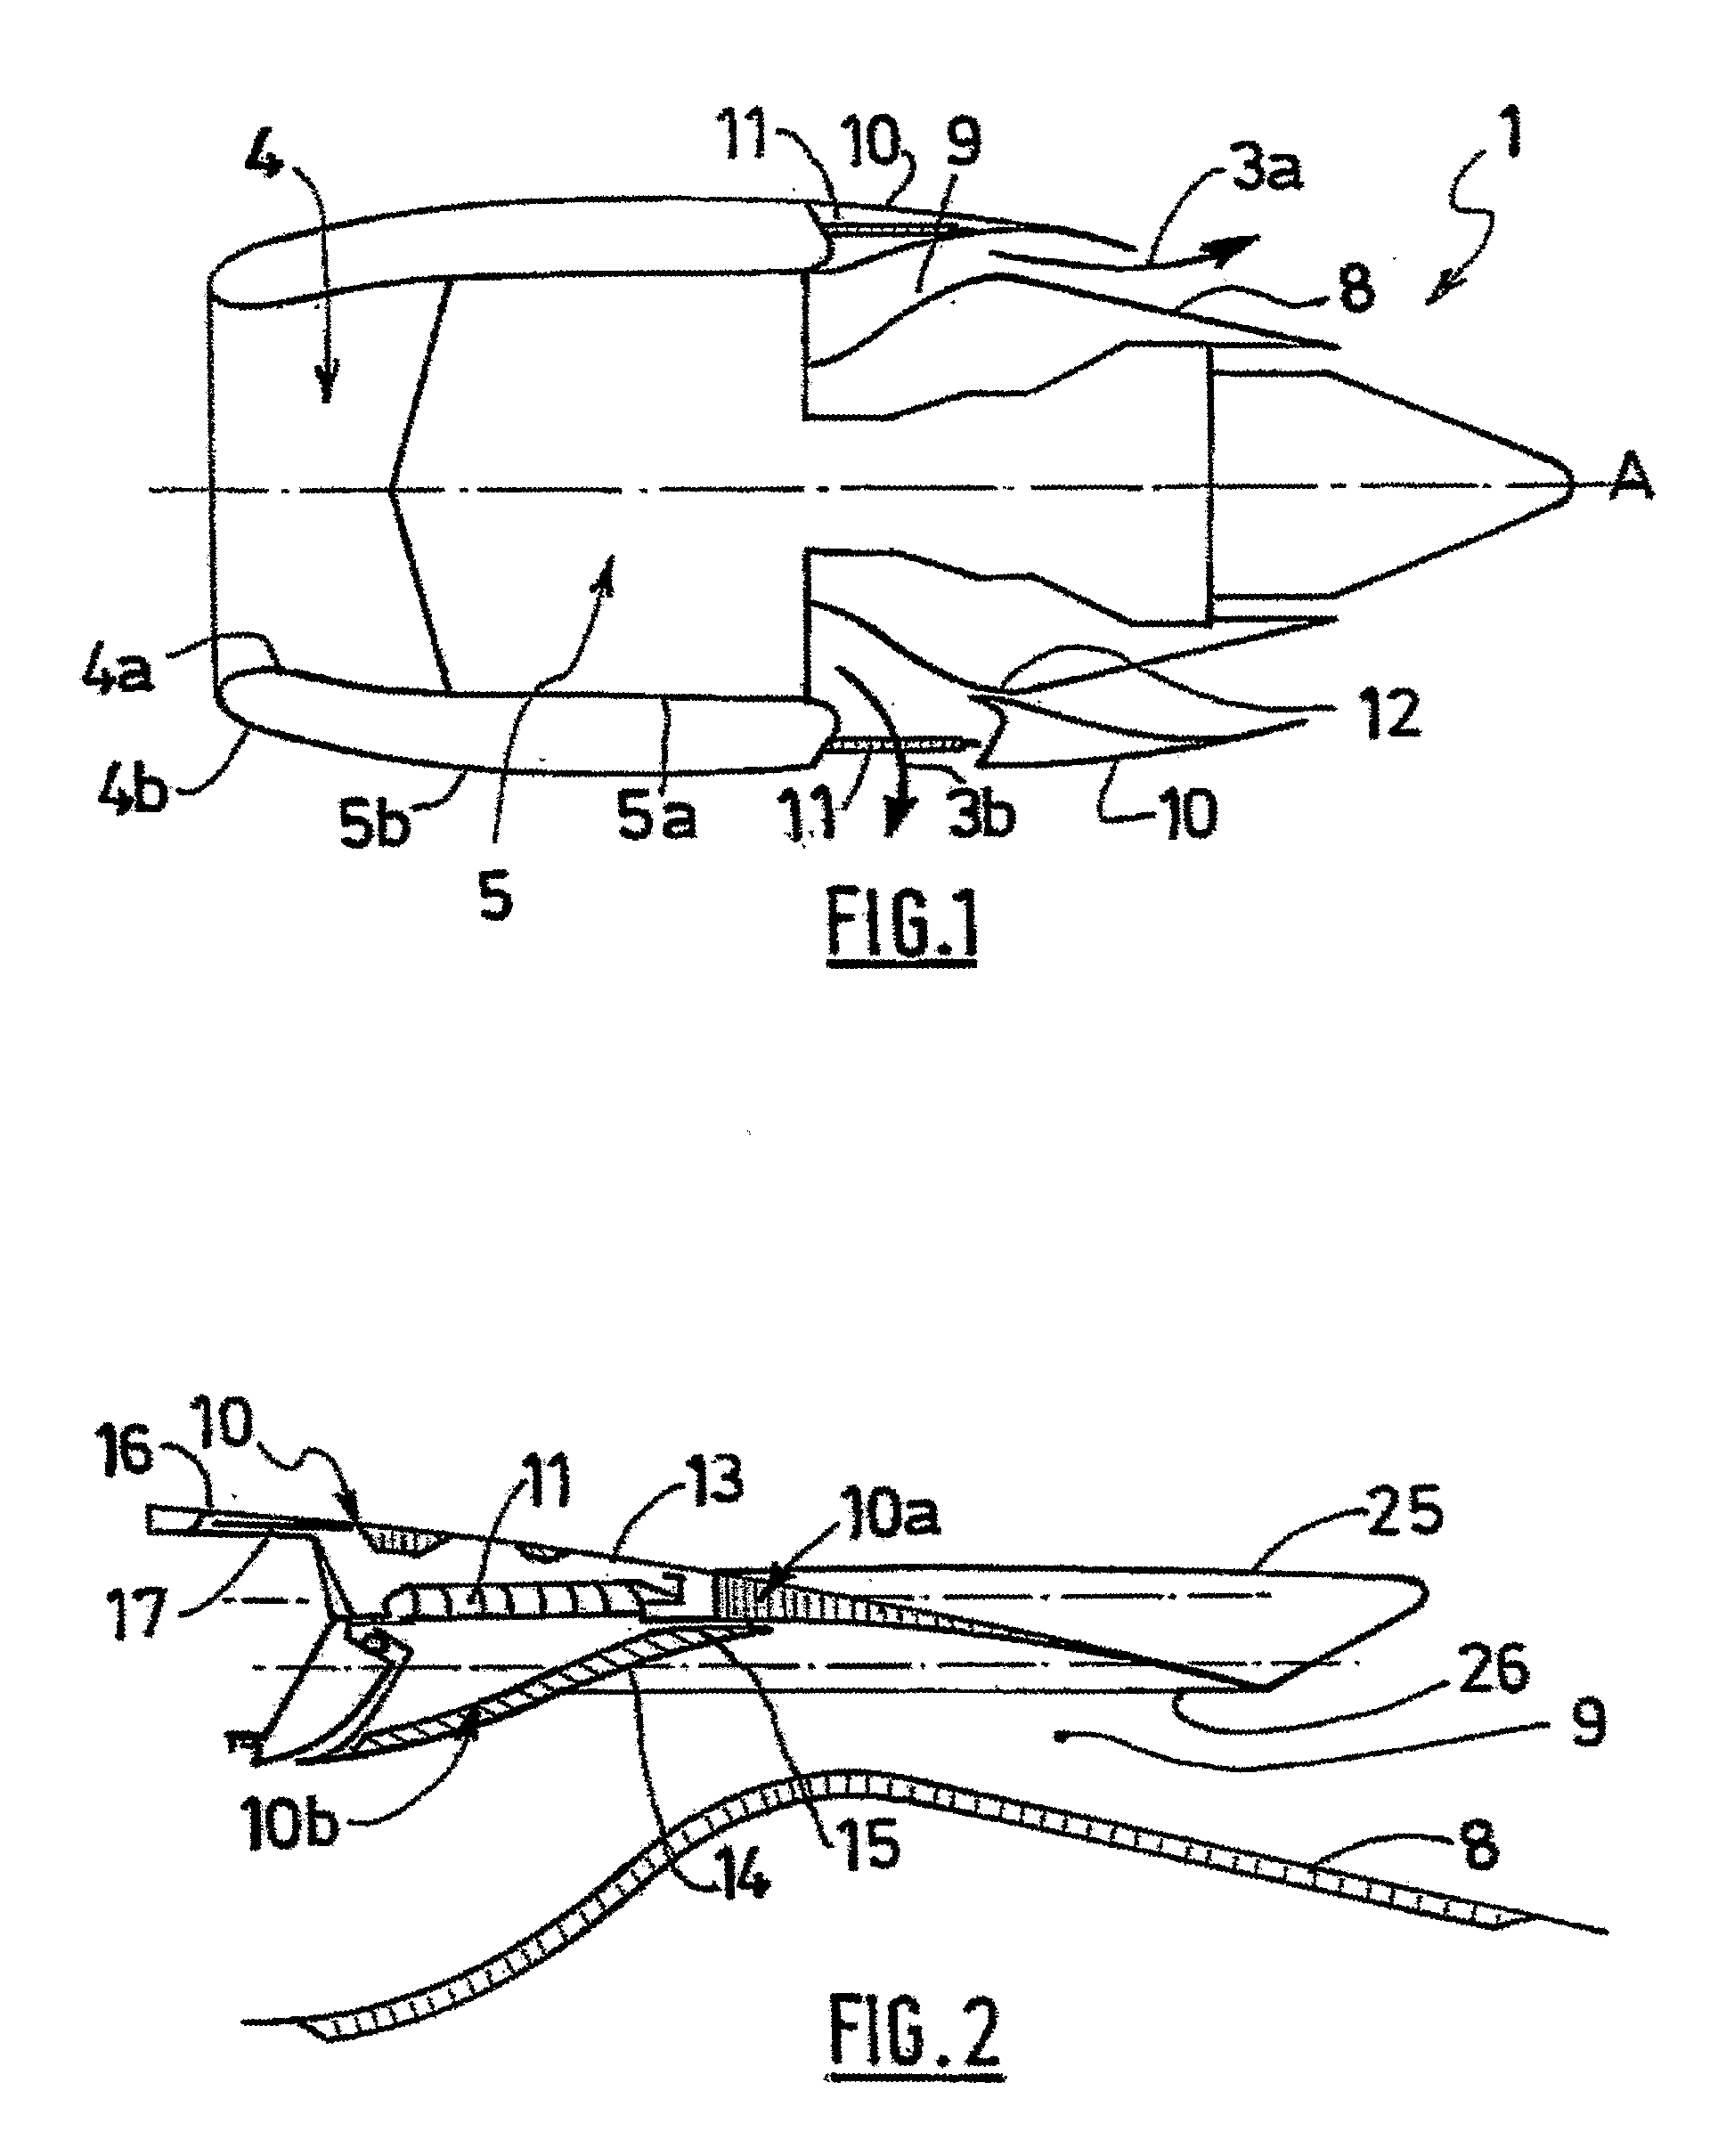 Thrust reverser forming an adaptive nozzle